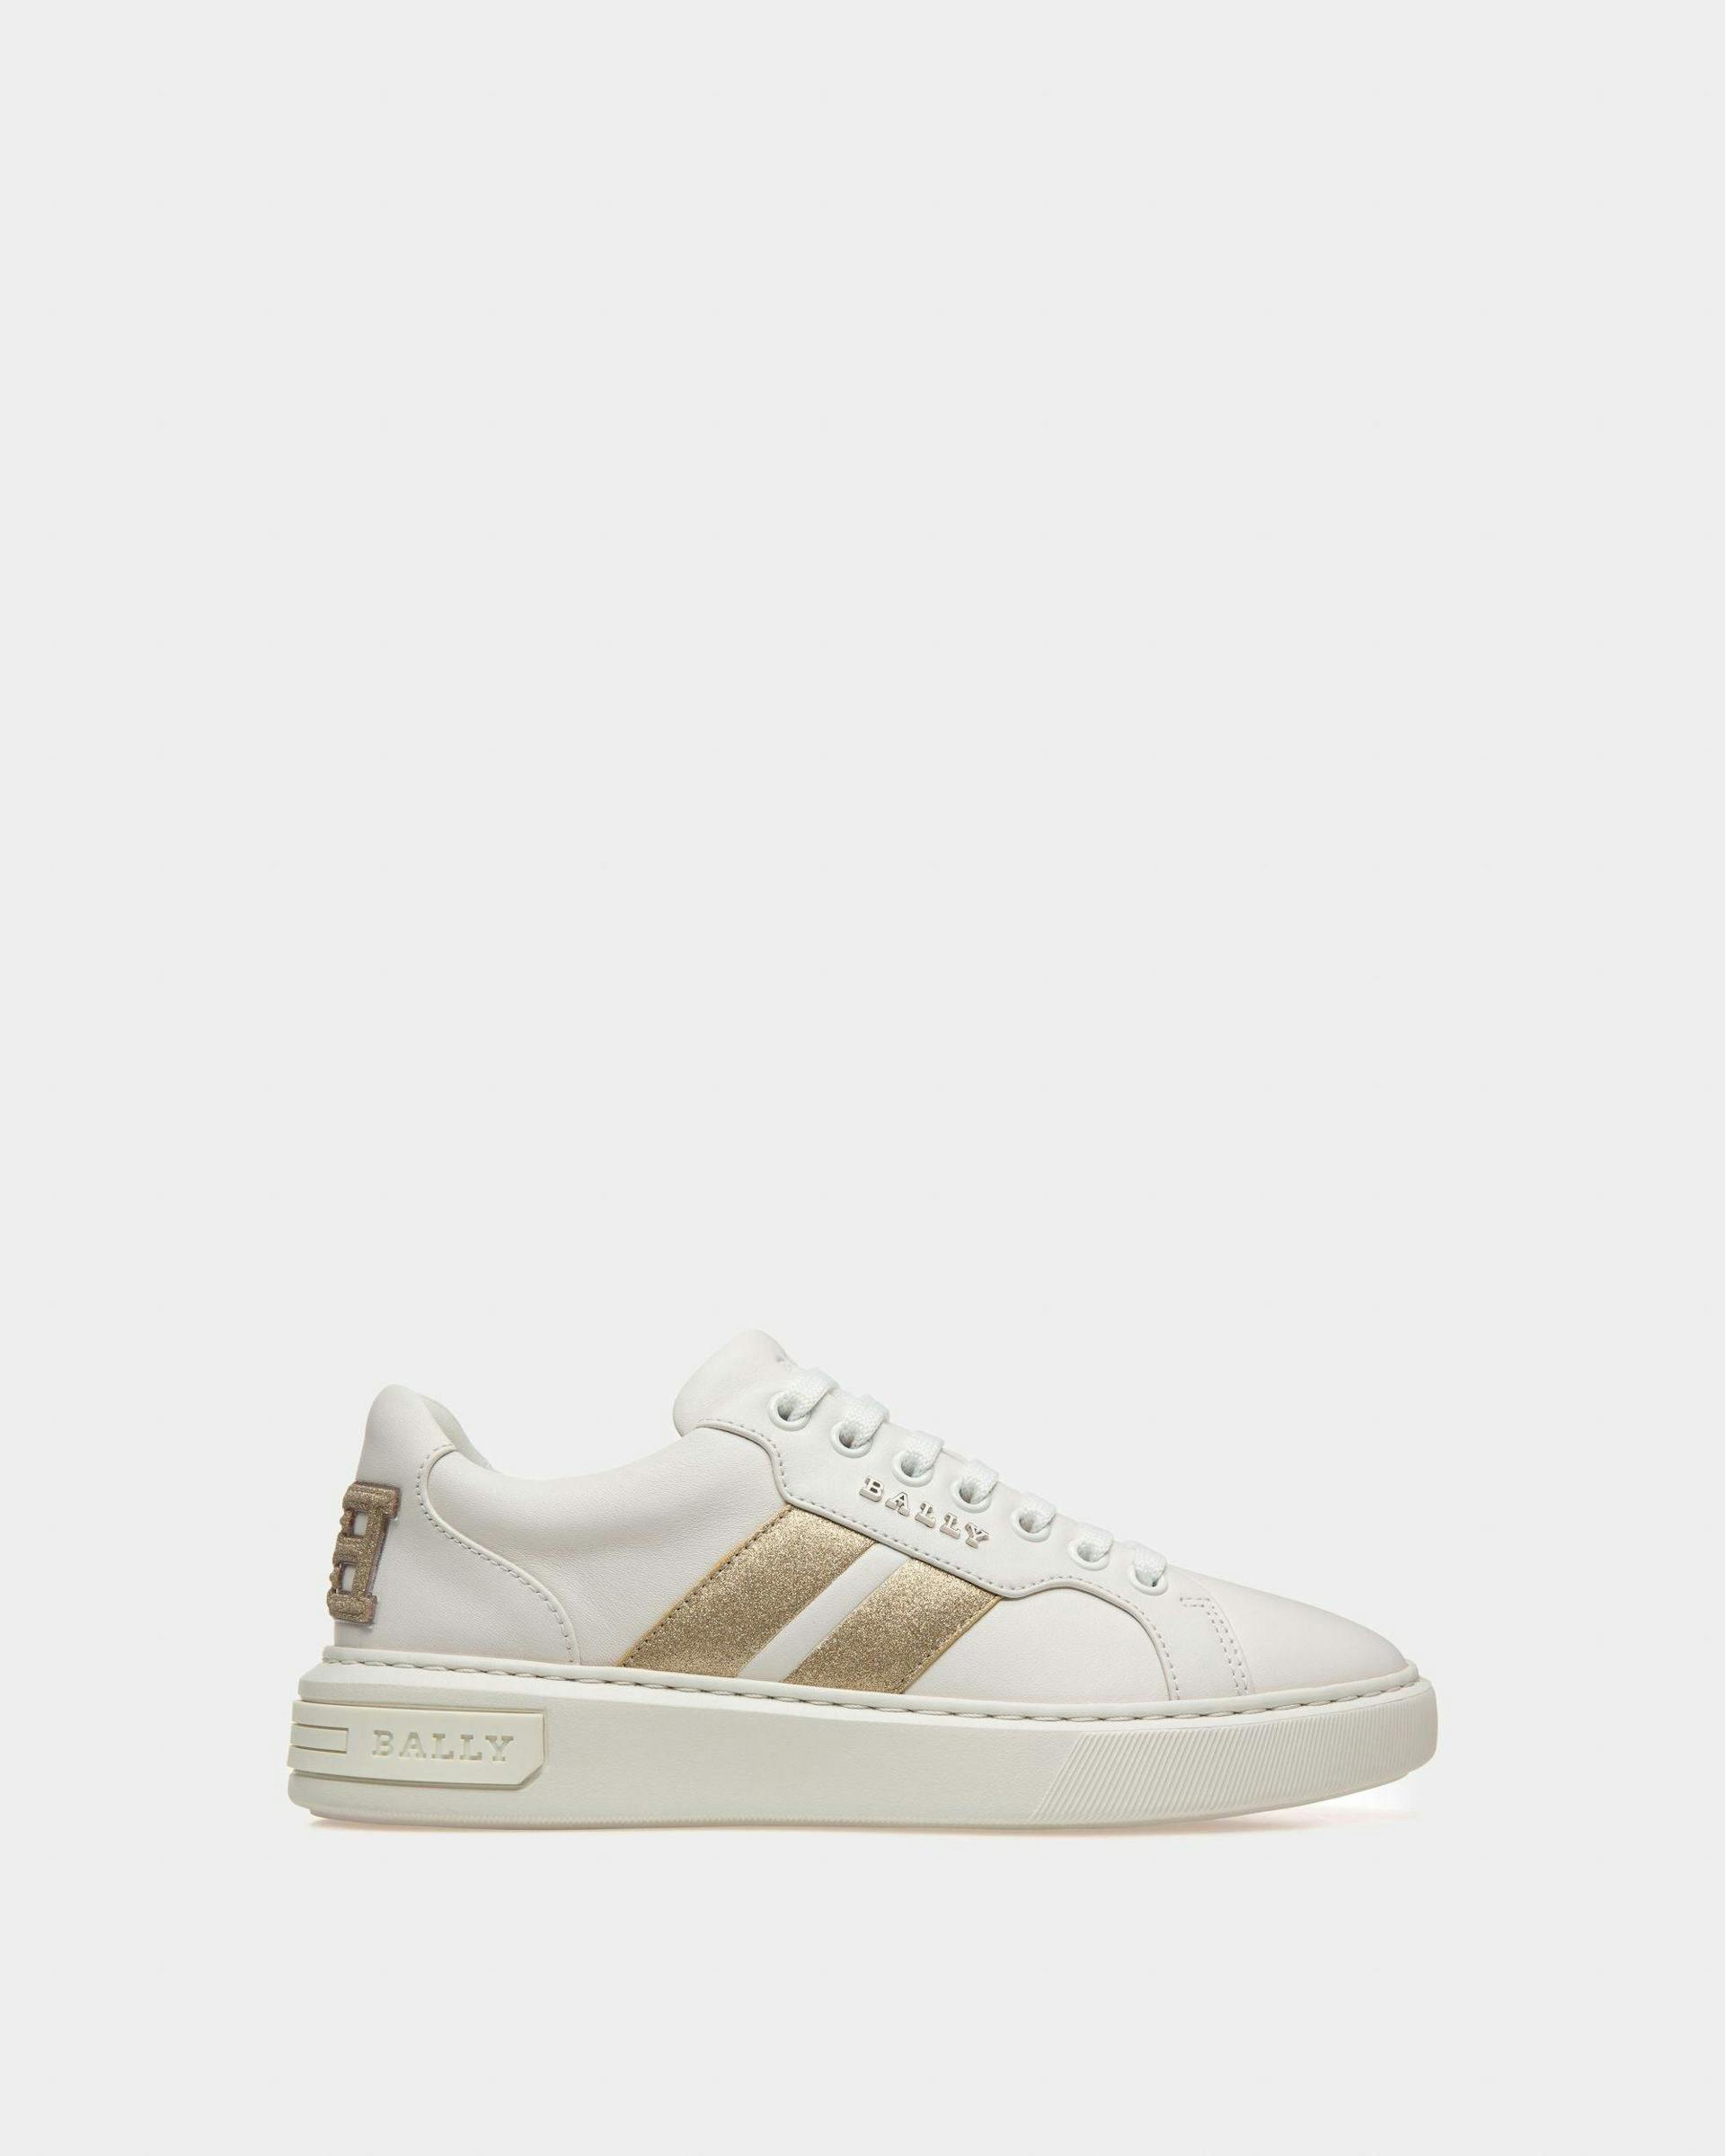 Melany Sneakers In White And Yellow Gold Leather - Women's - Bally - 01